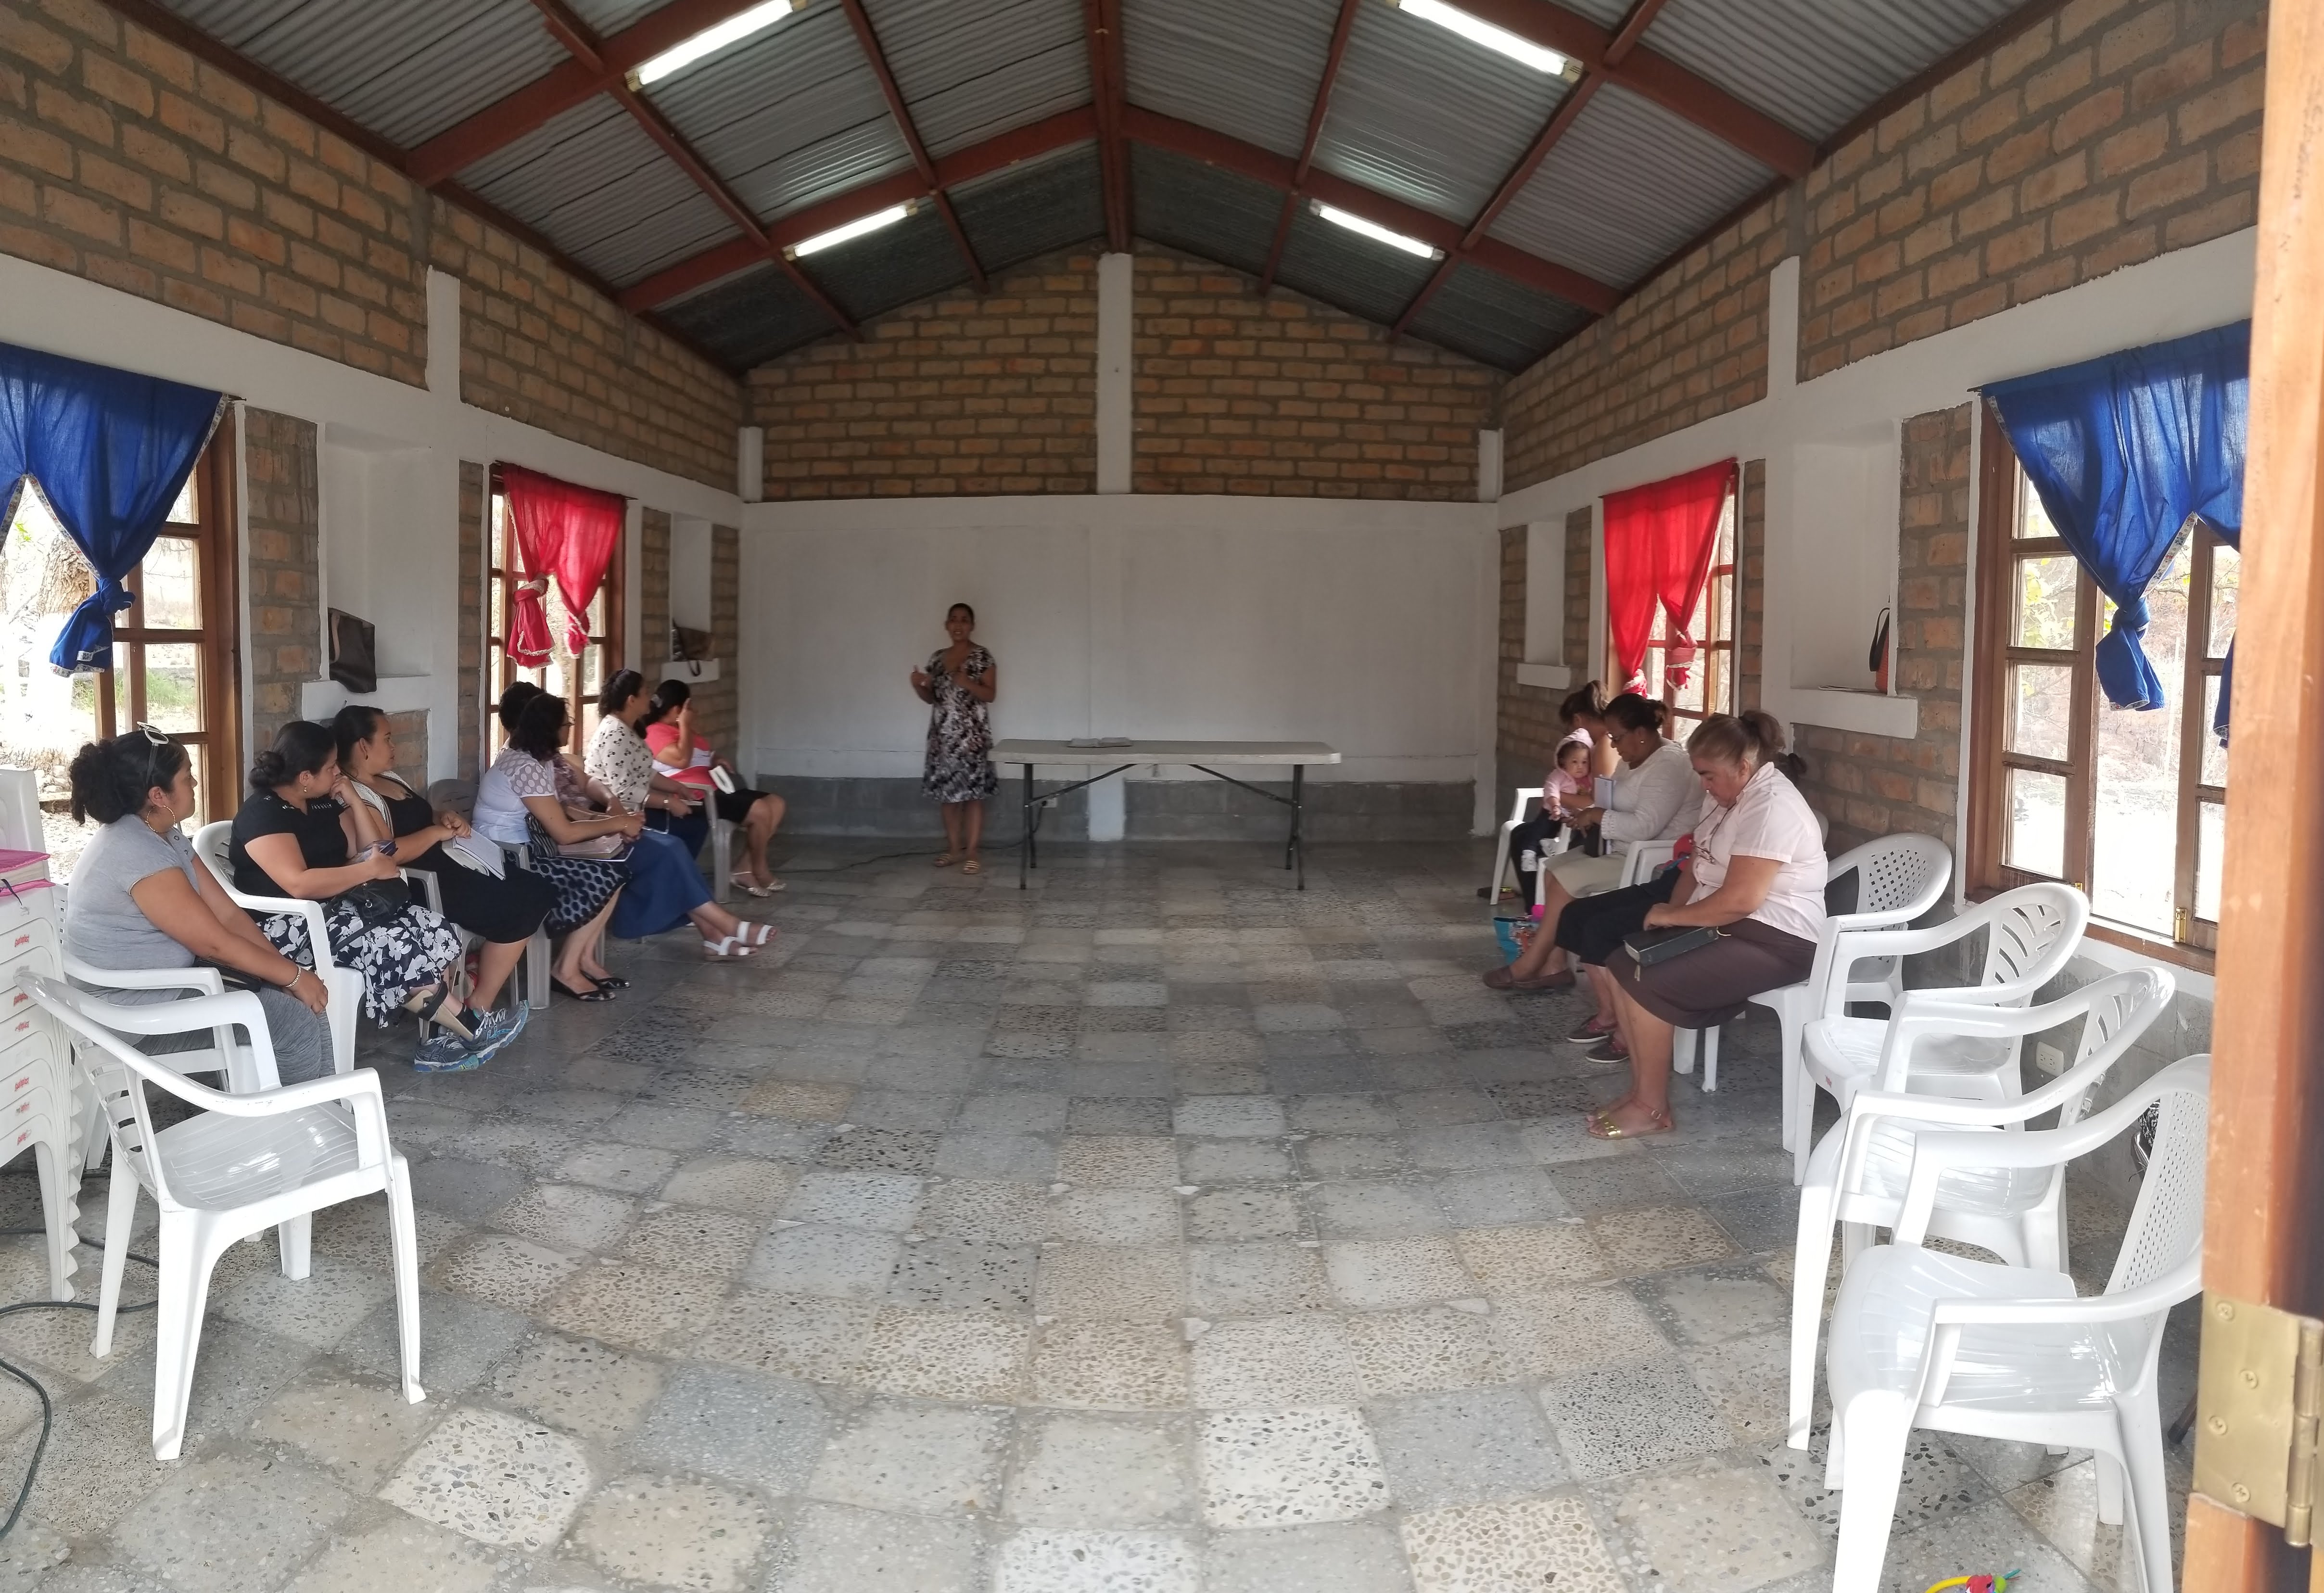 Presbyterian women gathered to fast, pray, and worship, and to dedicate Villa Gracia retreat center to ministry of the church.